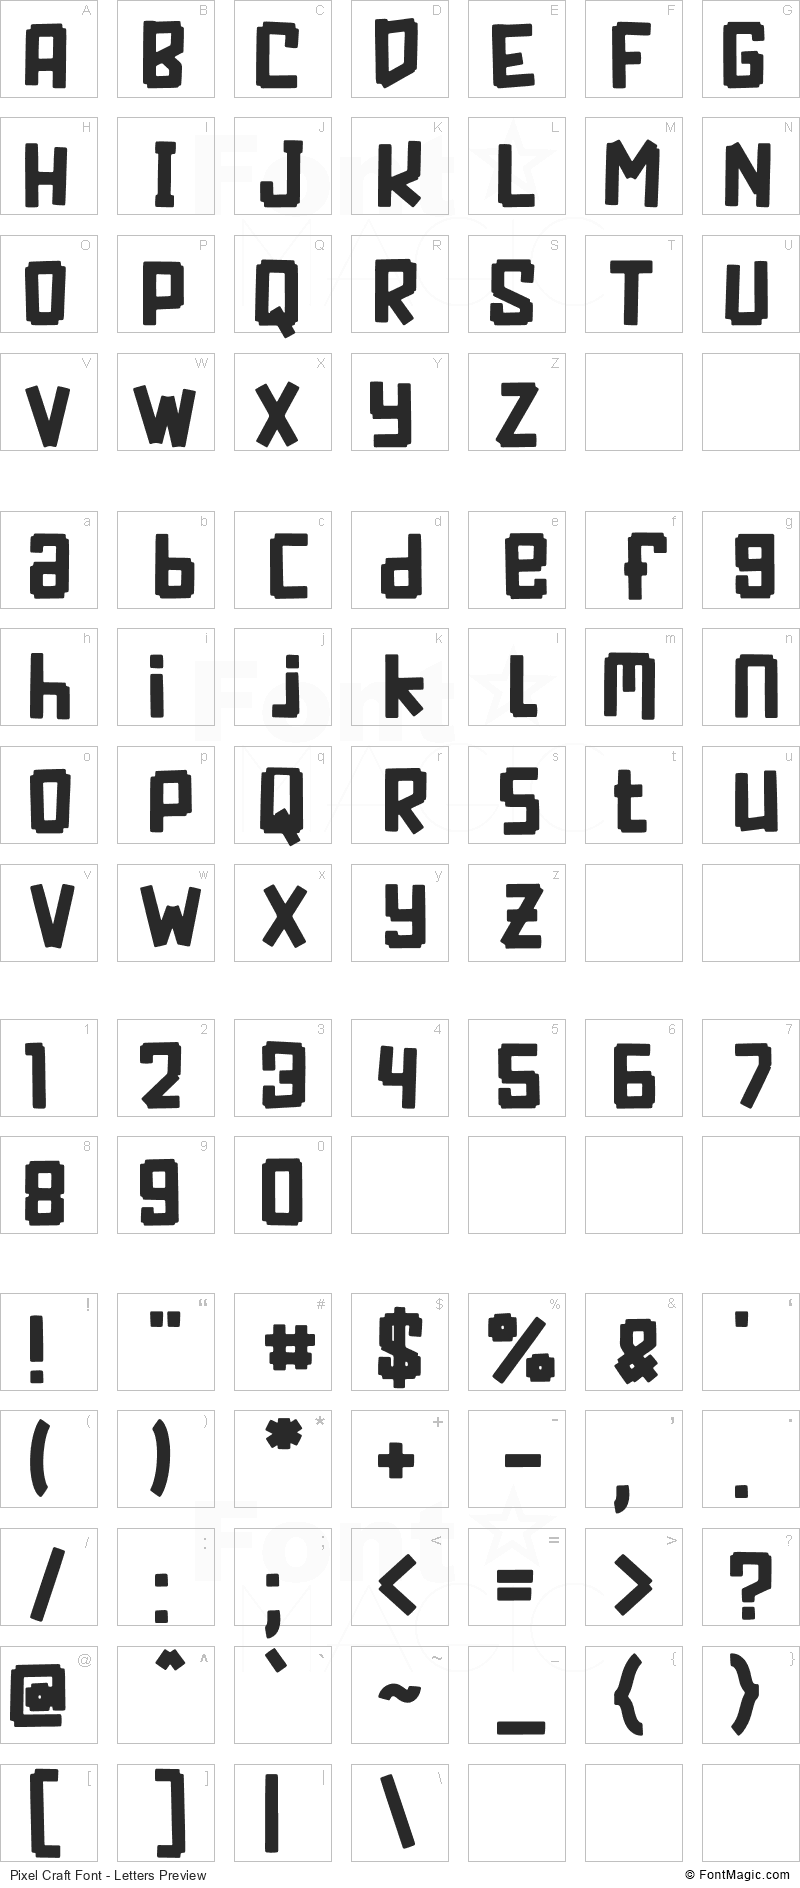 Pixel Craft Font - All Latters Preview Chart